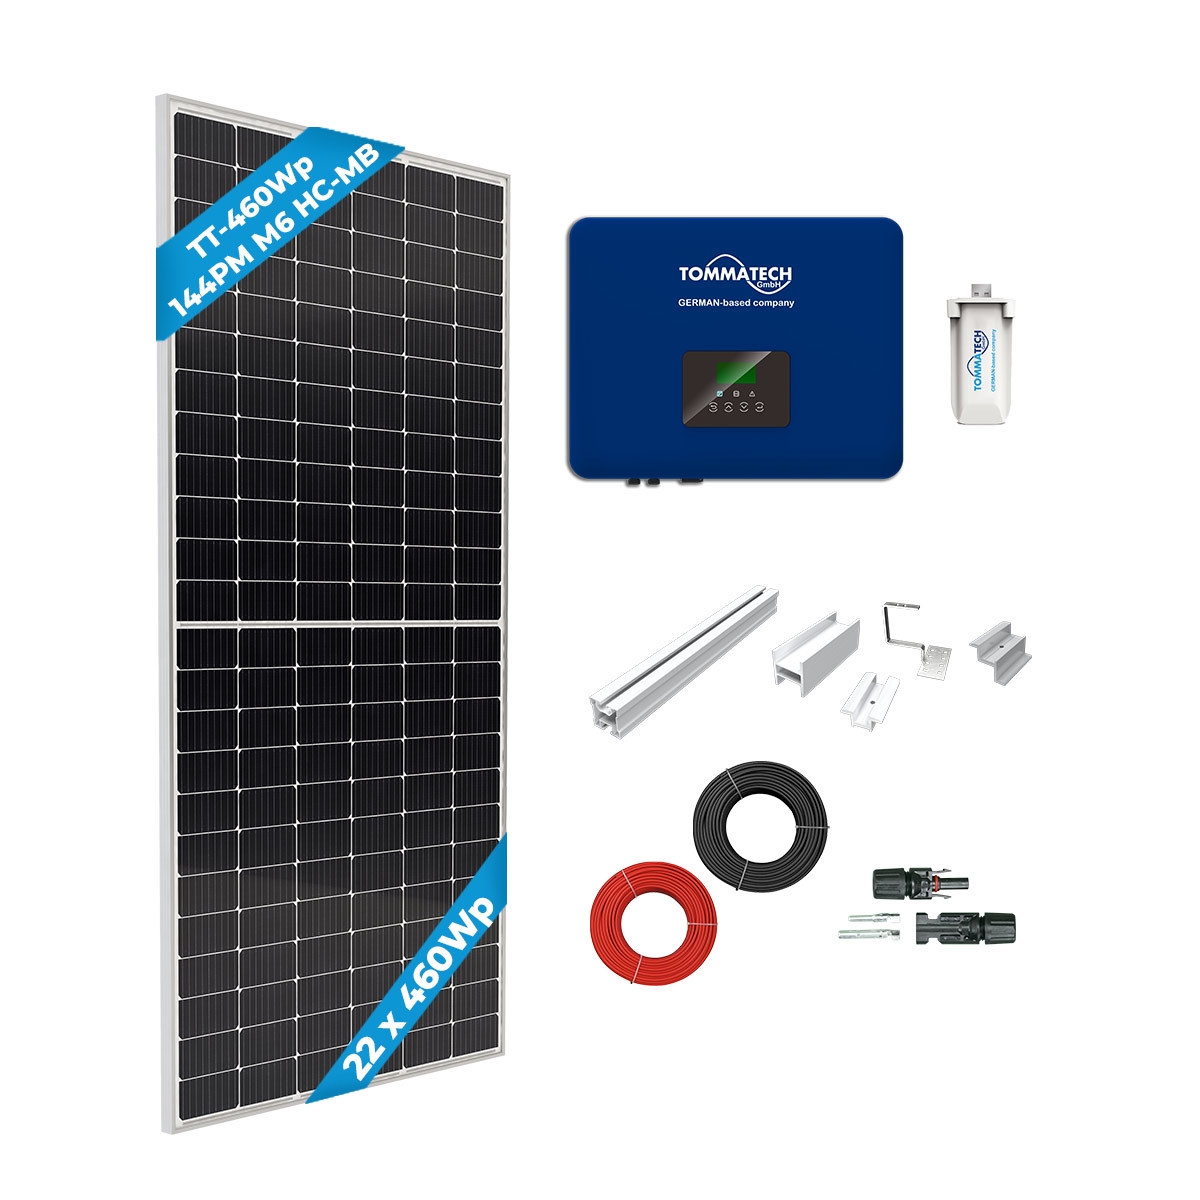 TommaTech 10kWe Tile Roof Three Phase On-Grid Solar Package